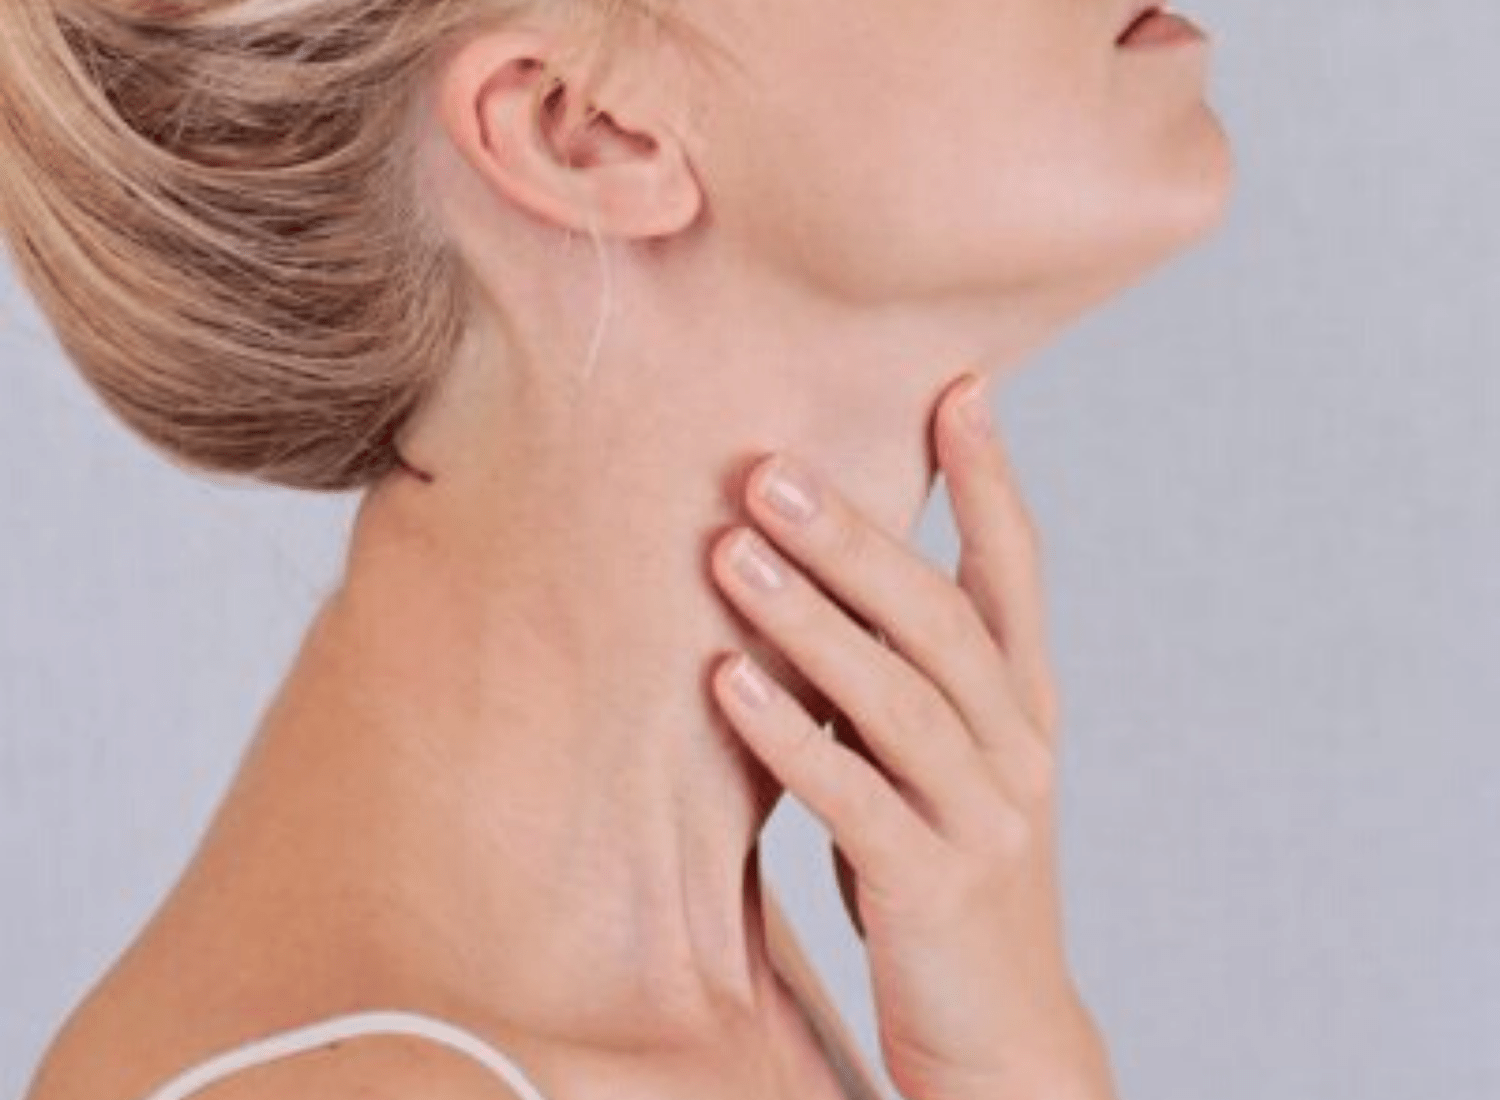 are you suffering from hypothyroidism?